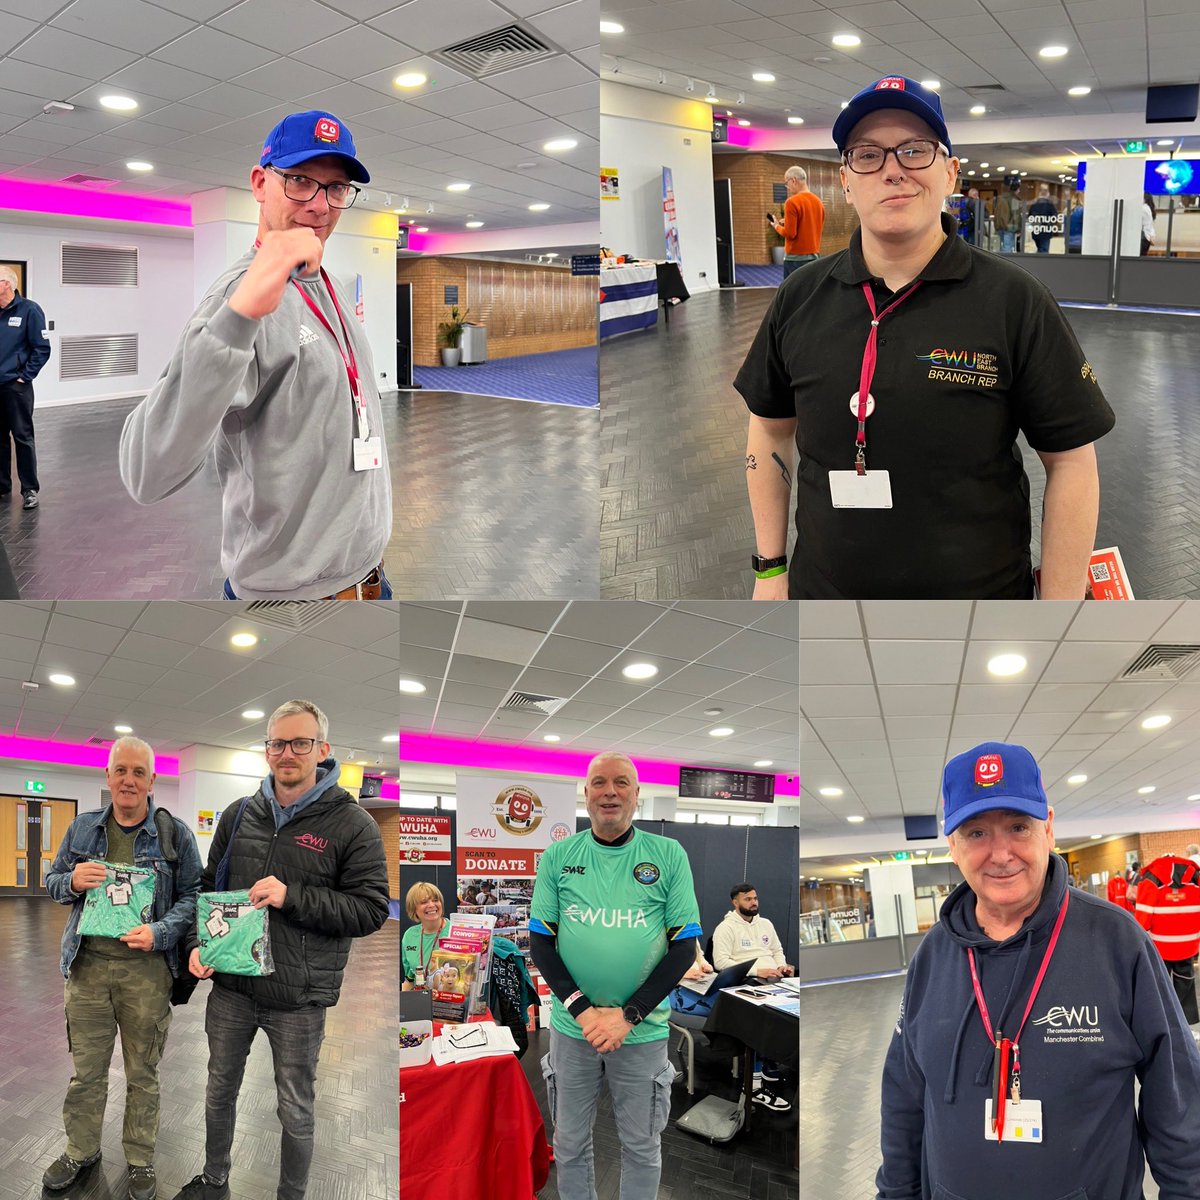 Thank you to everyone who stopped by our stand today & bought shirts, caps & raffle tickets! We will have them available at the stand tomorrow & remember that every purchase comes with a free entry into our raffle 😊 #cwu24